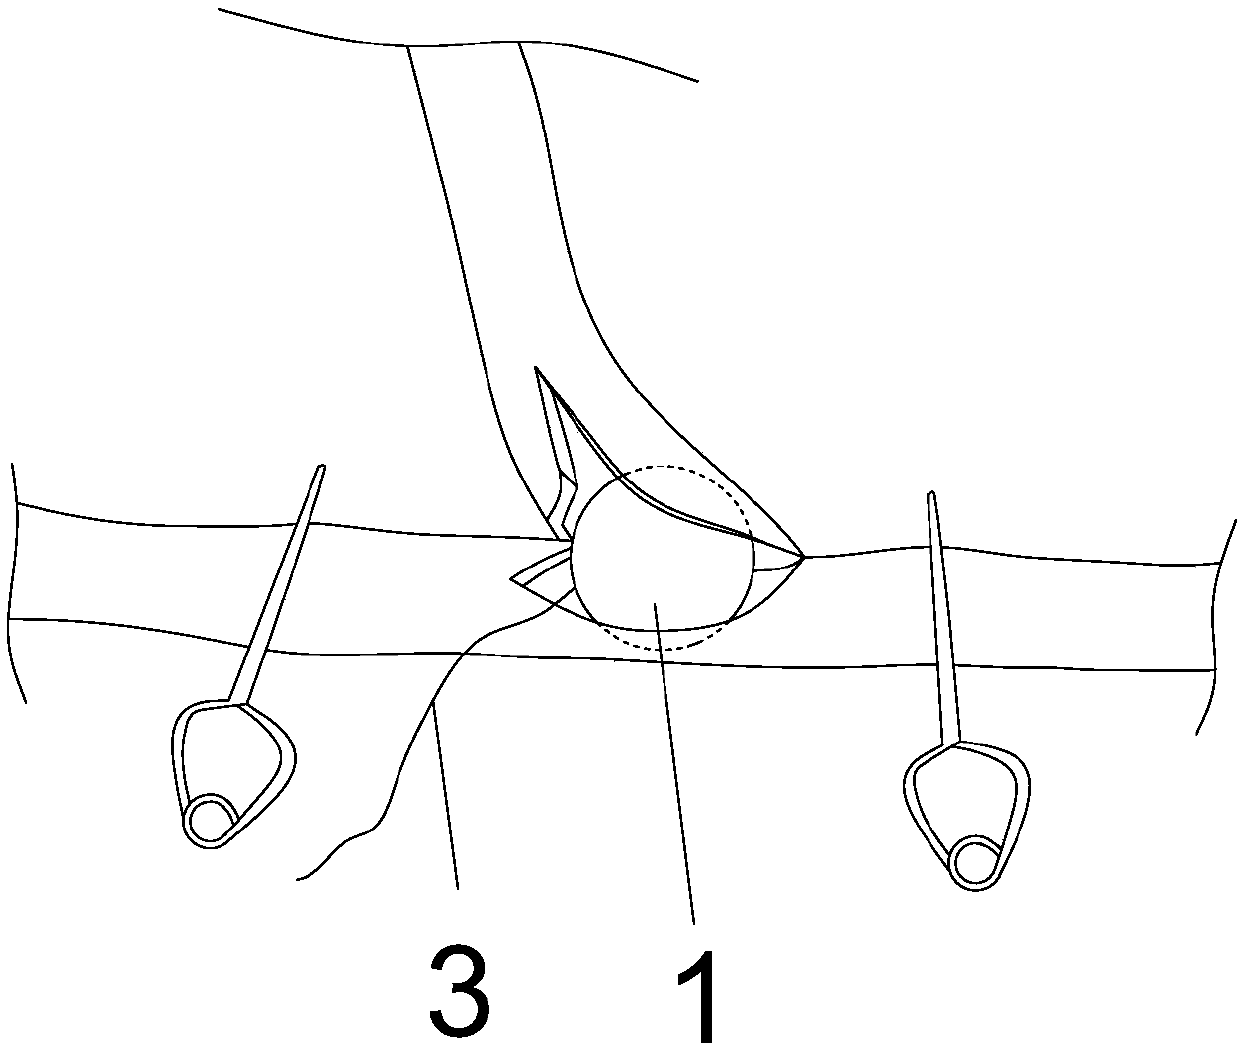 Small vascular bypass intra-operative auxiliary stoma forming device